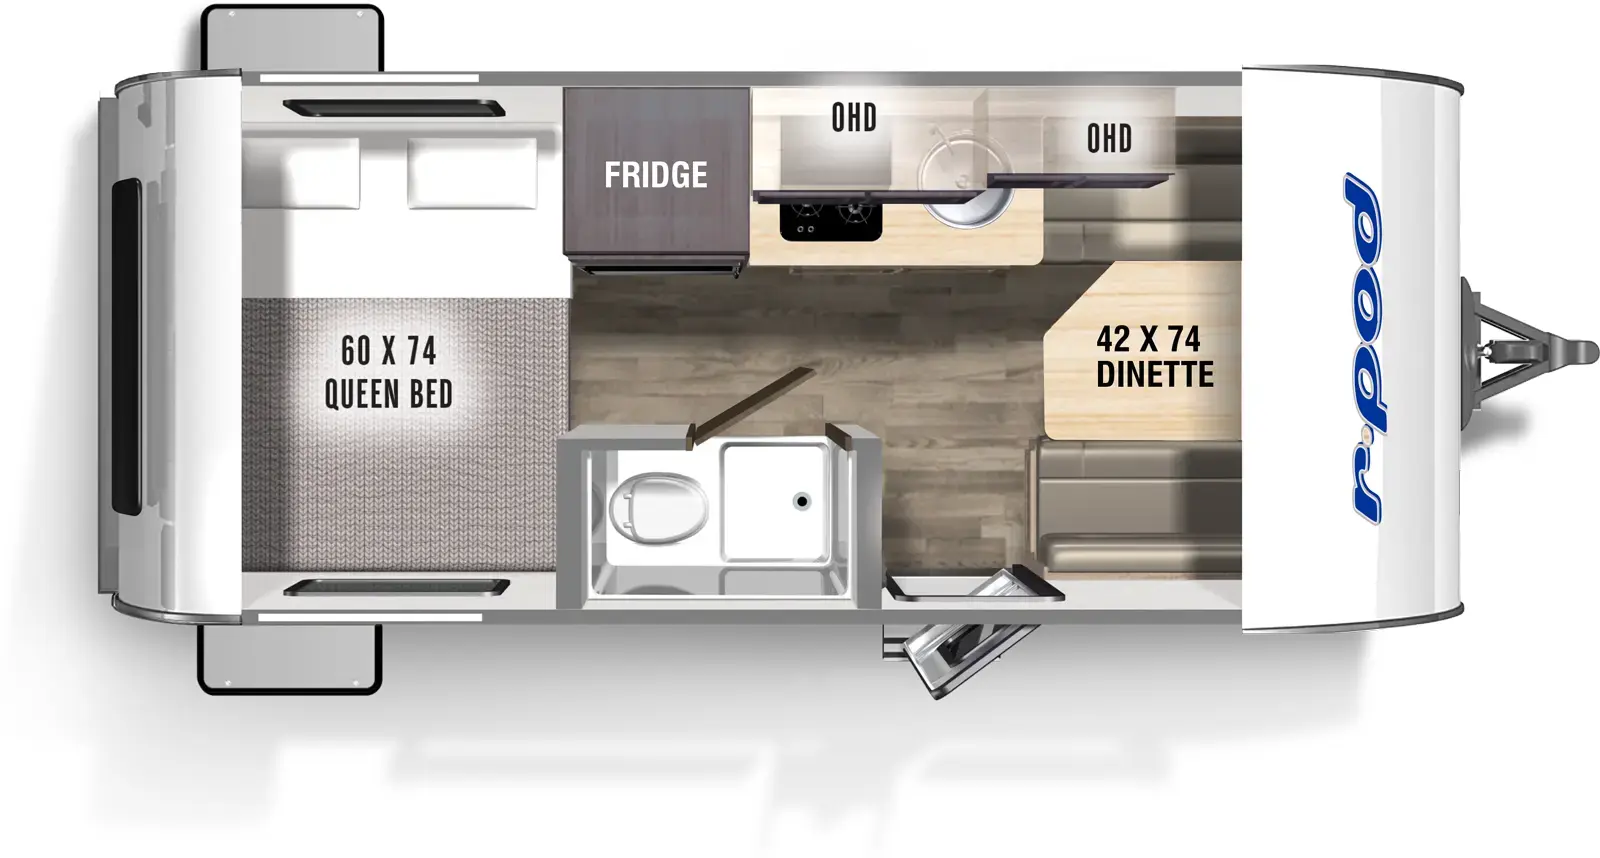 The RP-171C has one entry door and zero slideouts. Interior layout front to back: front dinette; off-door side kitchen counter with sink, cooktop, overhead cabinet, and refrigerator; door side entry and wet bathroom; rear queen bed.